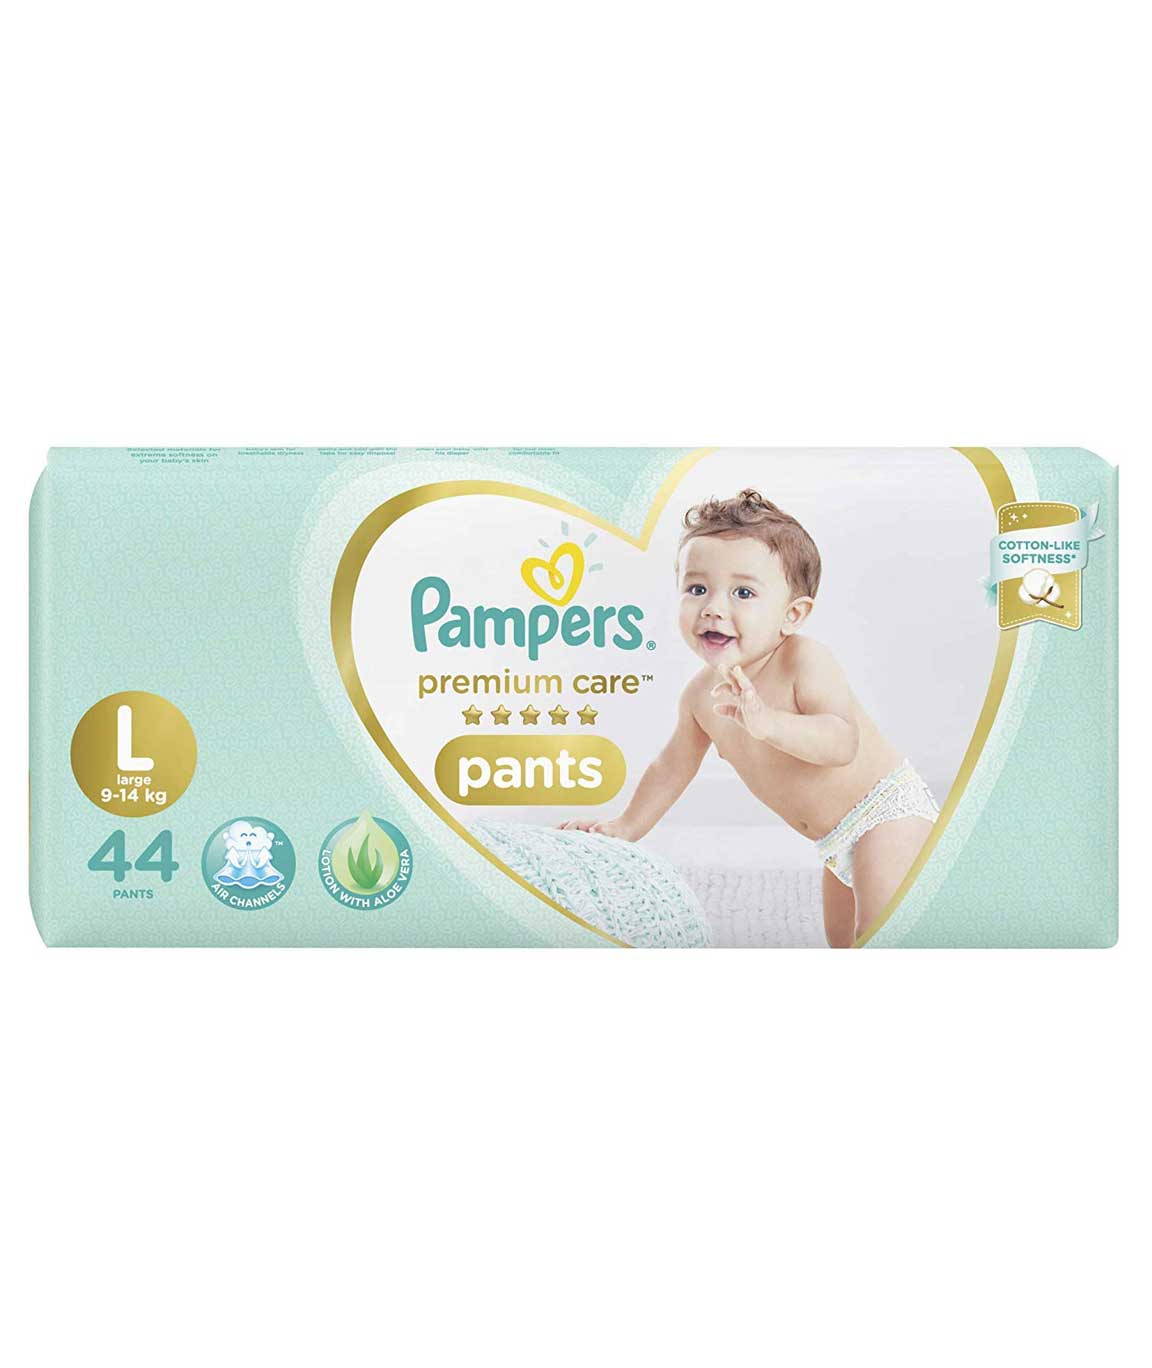 Pampers Premium Care Pants For Baby, NB (24Pants) - Town Tokri